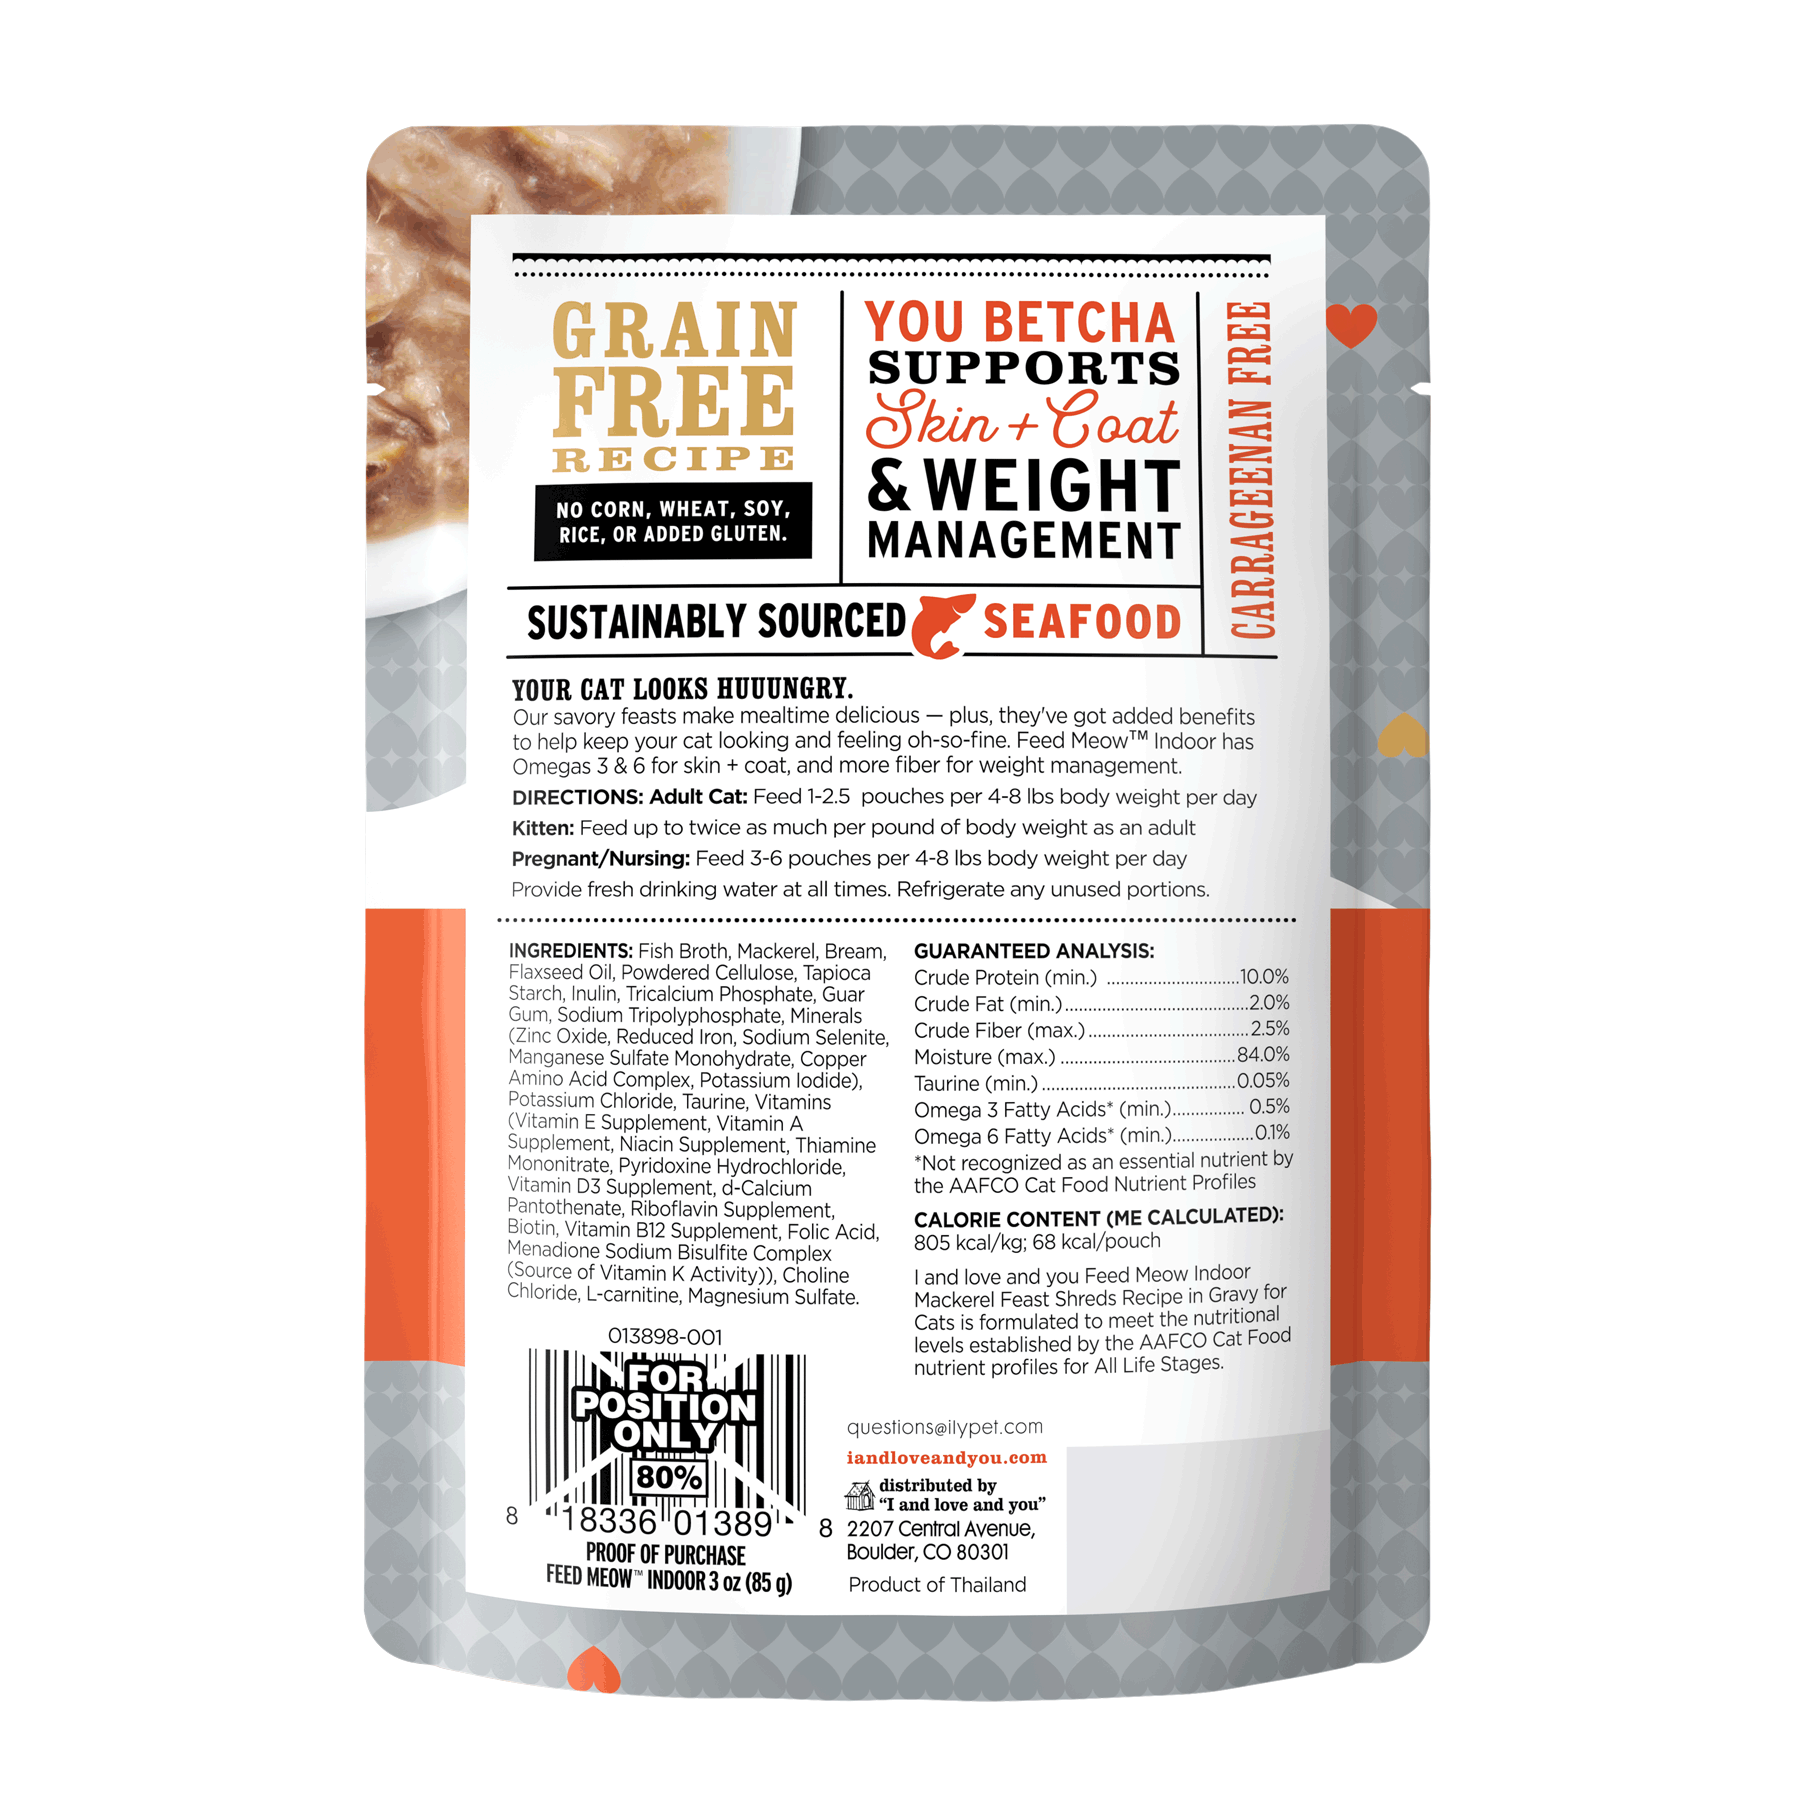 Feed Meow Indoor cat food package with label, barcode, and text on white background.